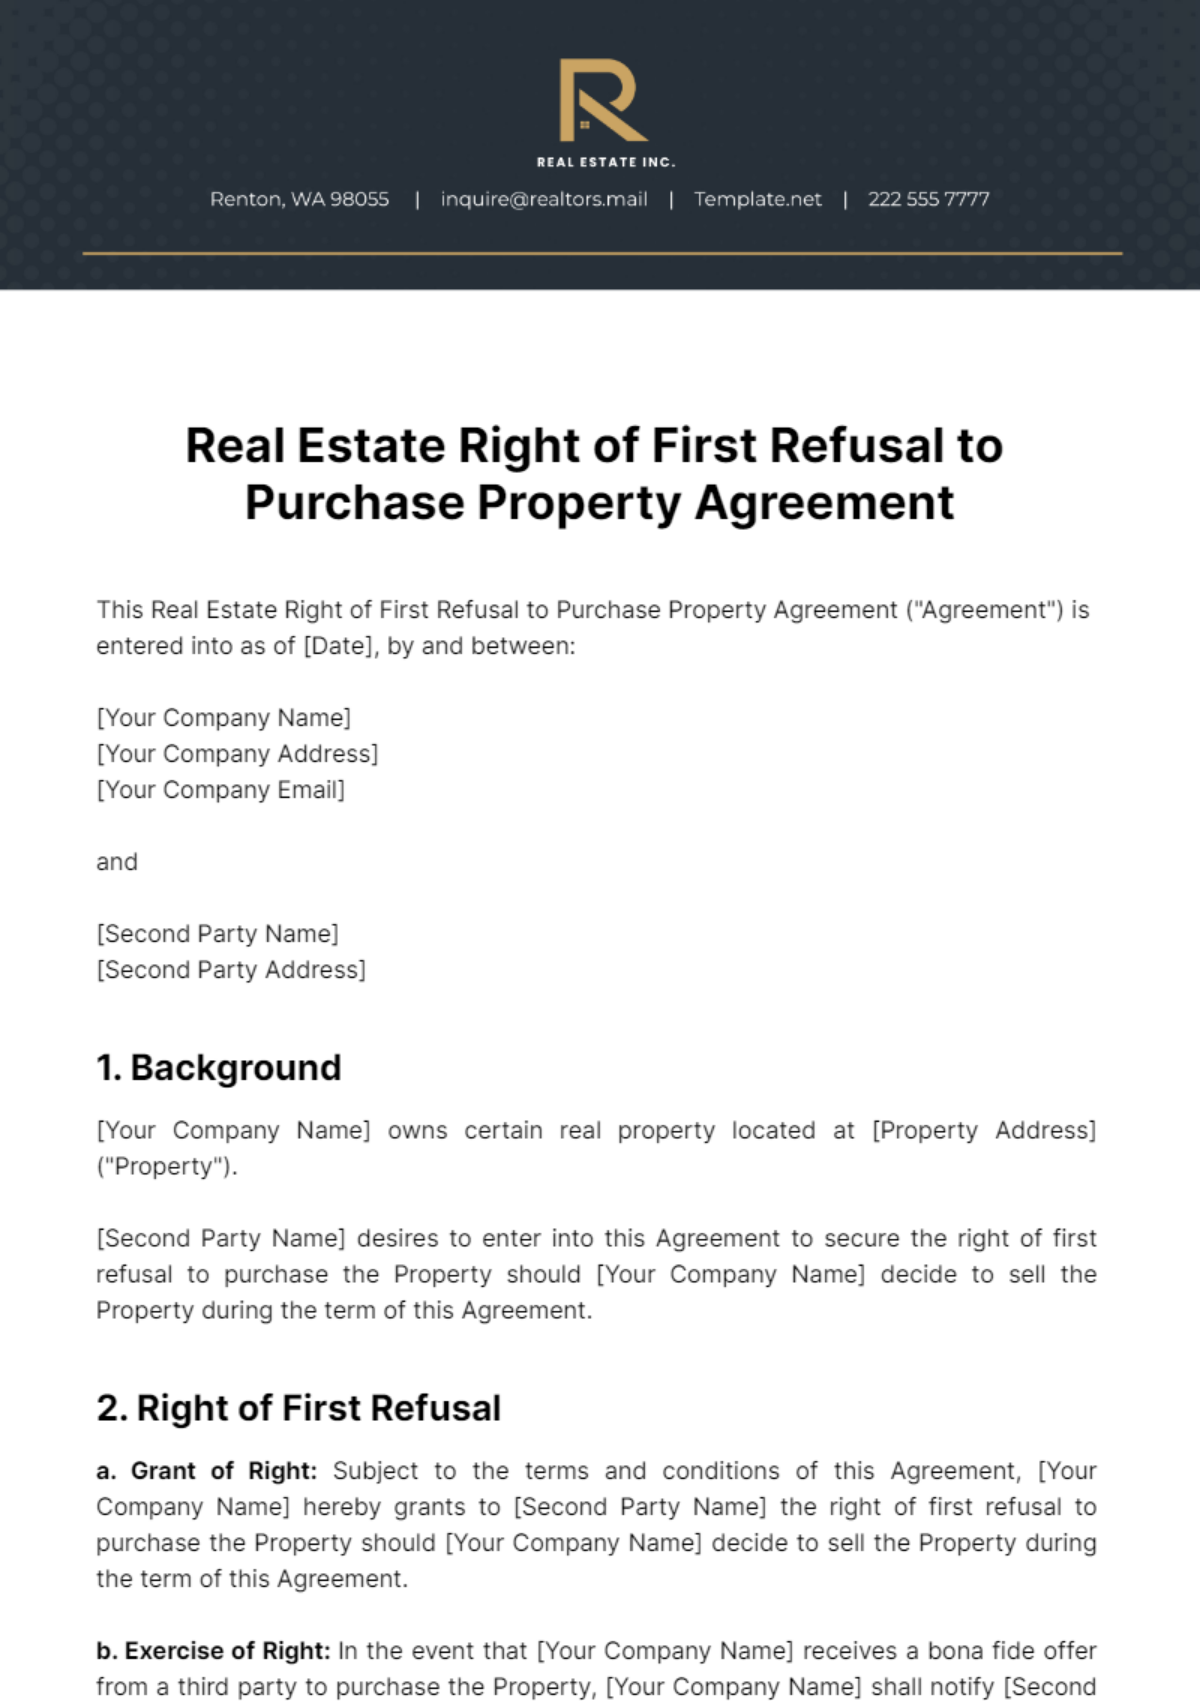 Real Estate Right of First Refusal to Purchase Property Agreement Template